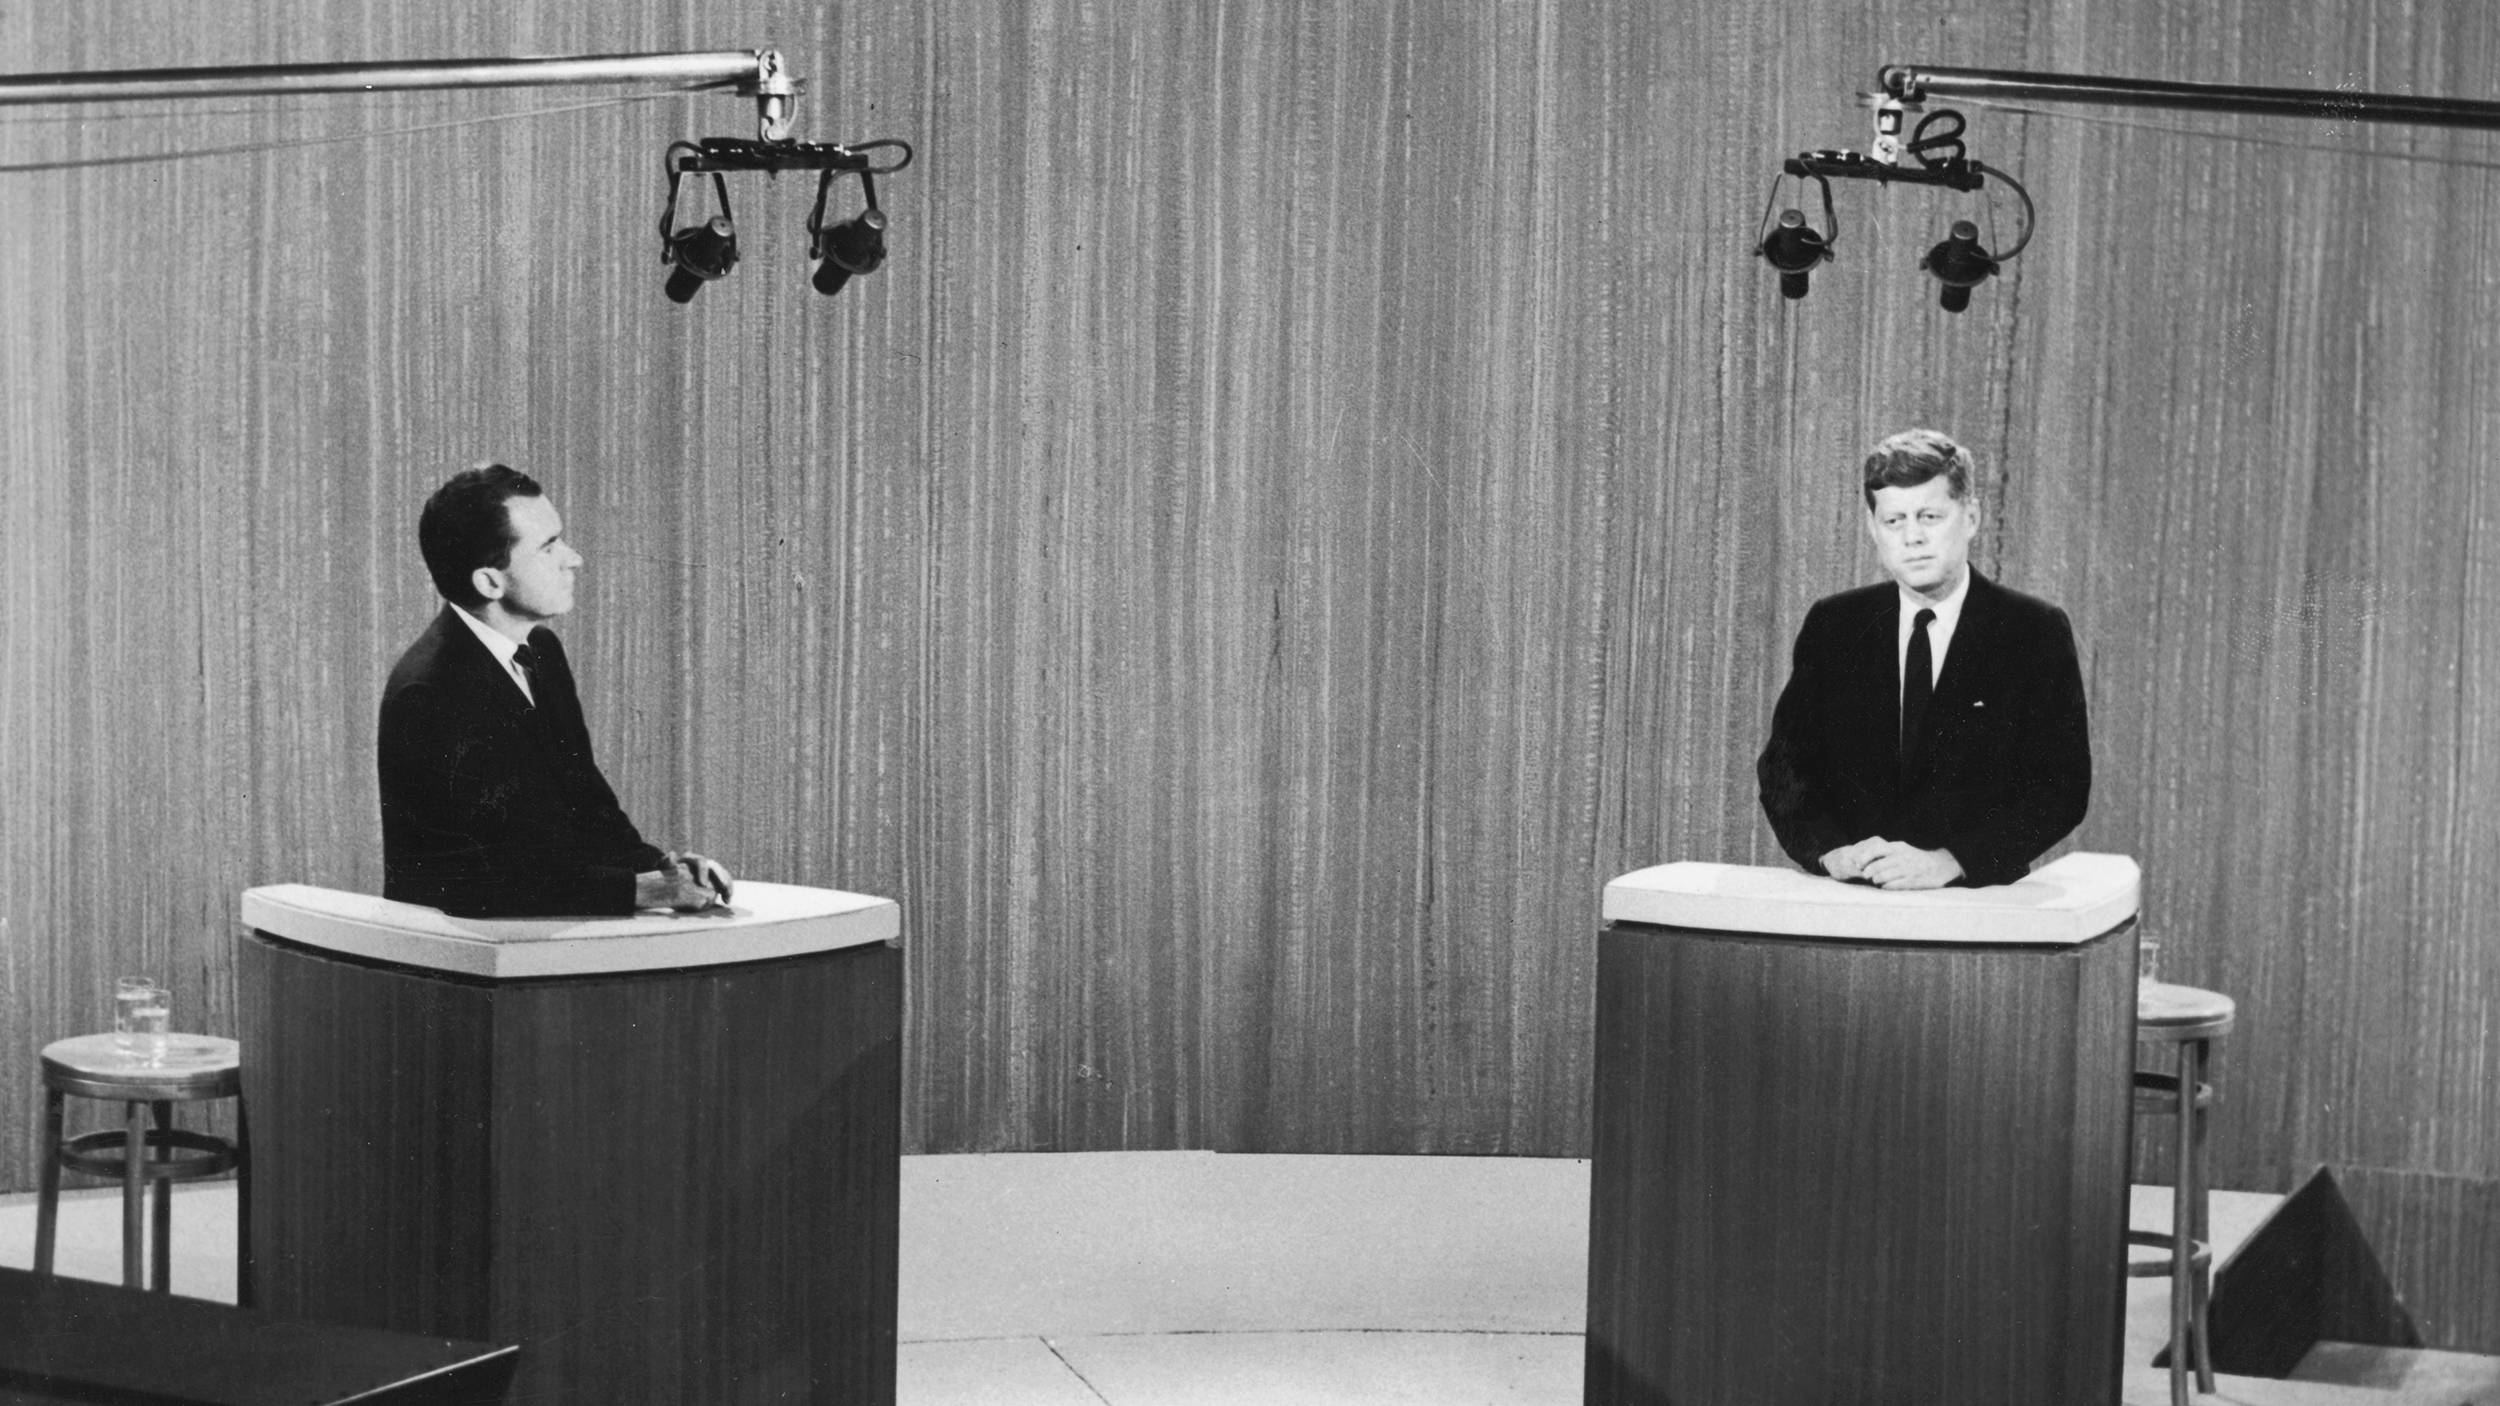 Two men from different political parties in suits stand at podiums under studio lights, participating in a televised debate.